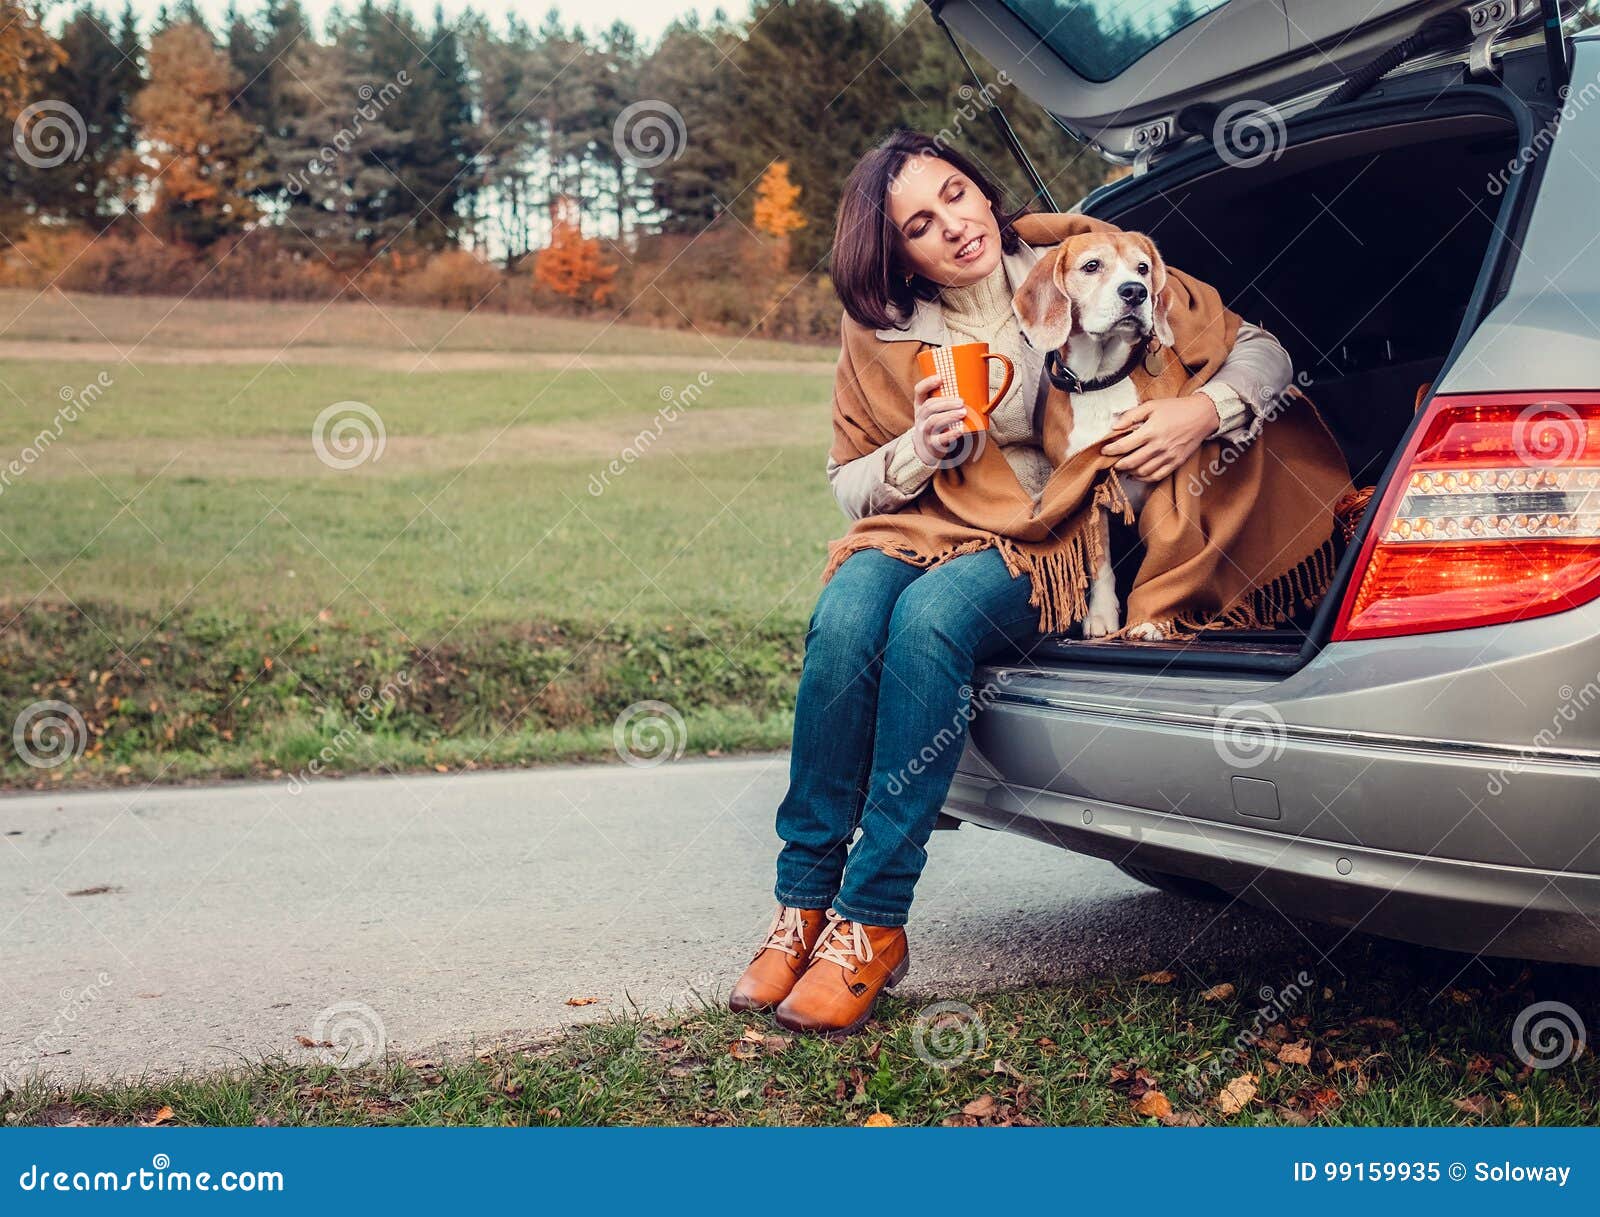 woman with dog sit together in cat truck and warms hot tea